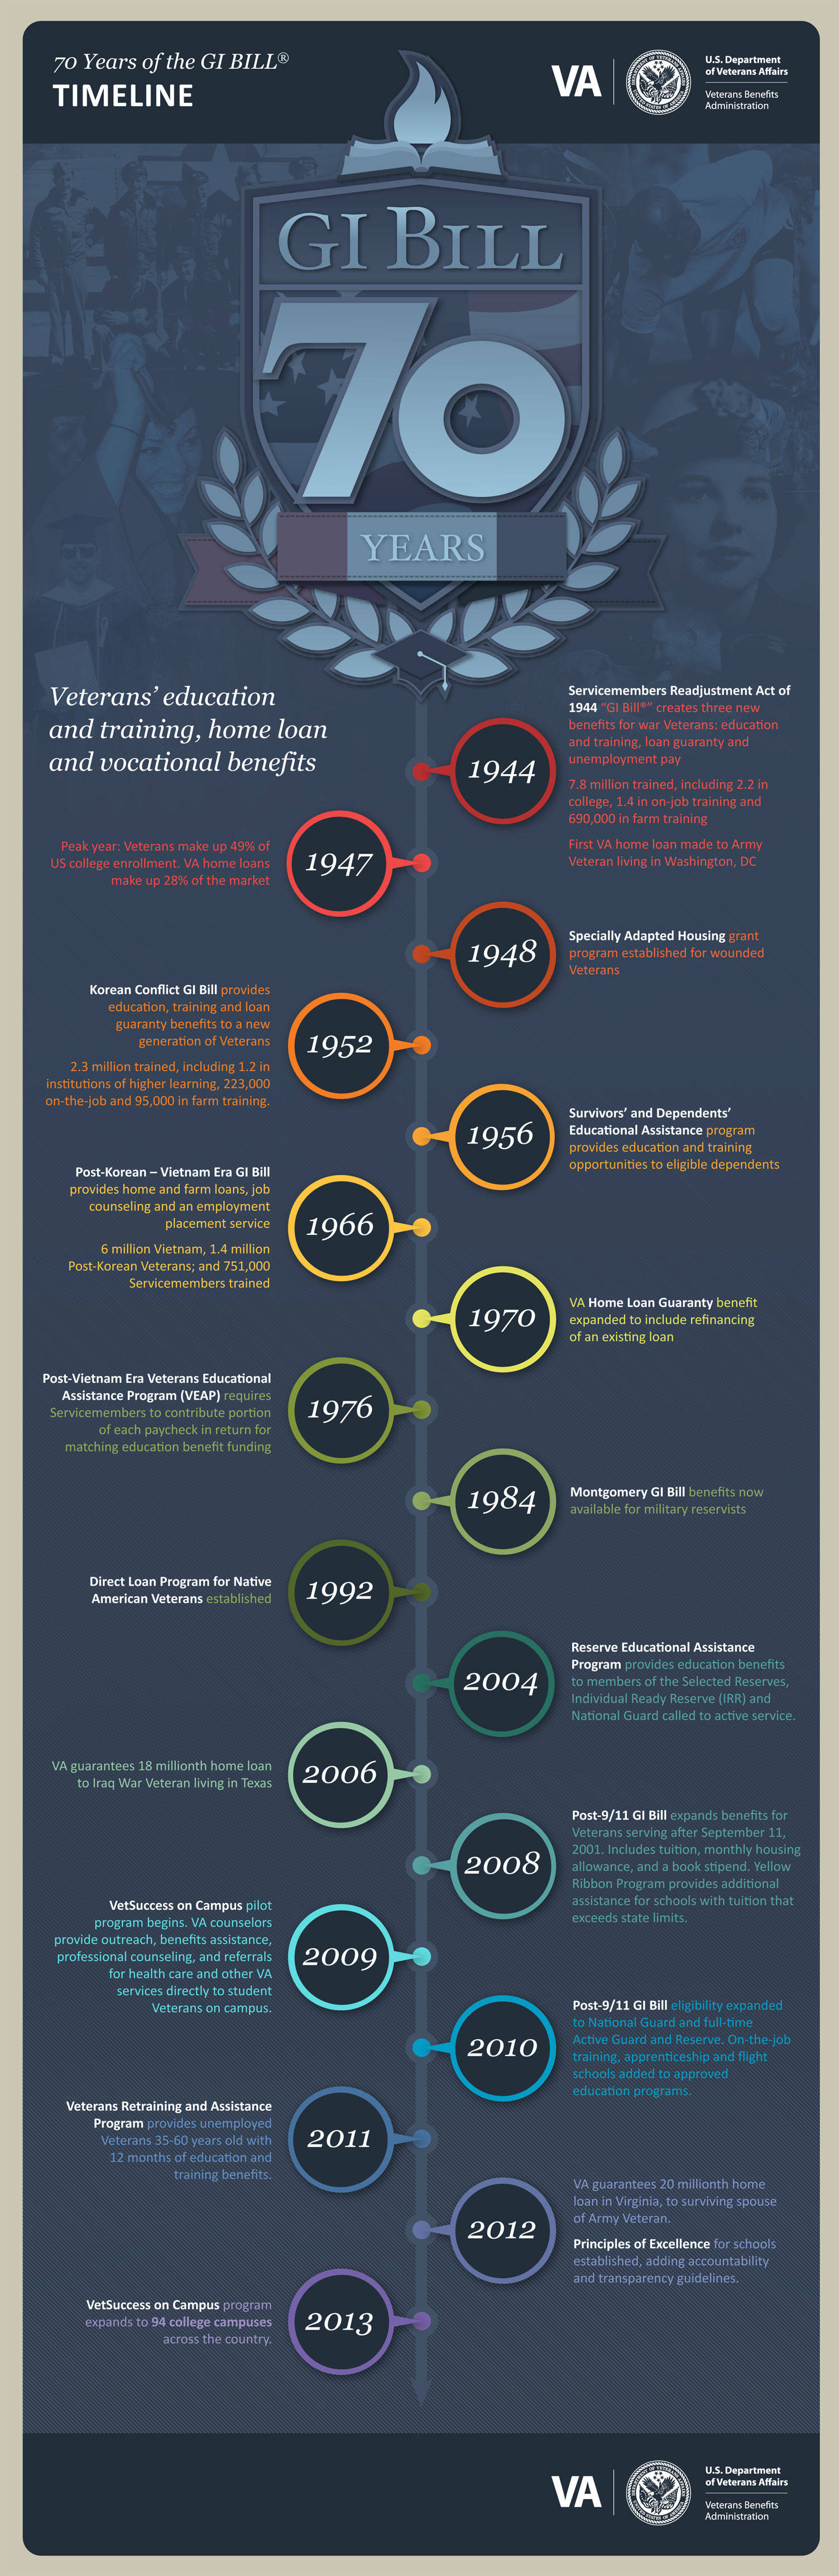 70th GI Bill Anniversary
Infographic: TIMELINE

70 YEARS OF THE GI BILL 
Veterans' education and training, home loan and vocational benefits

1944
Servicemembers Readjustment Act of 1944 